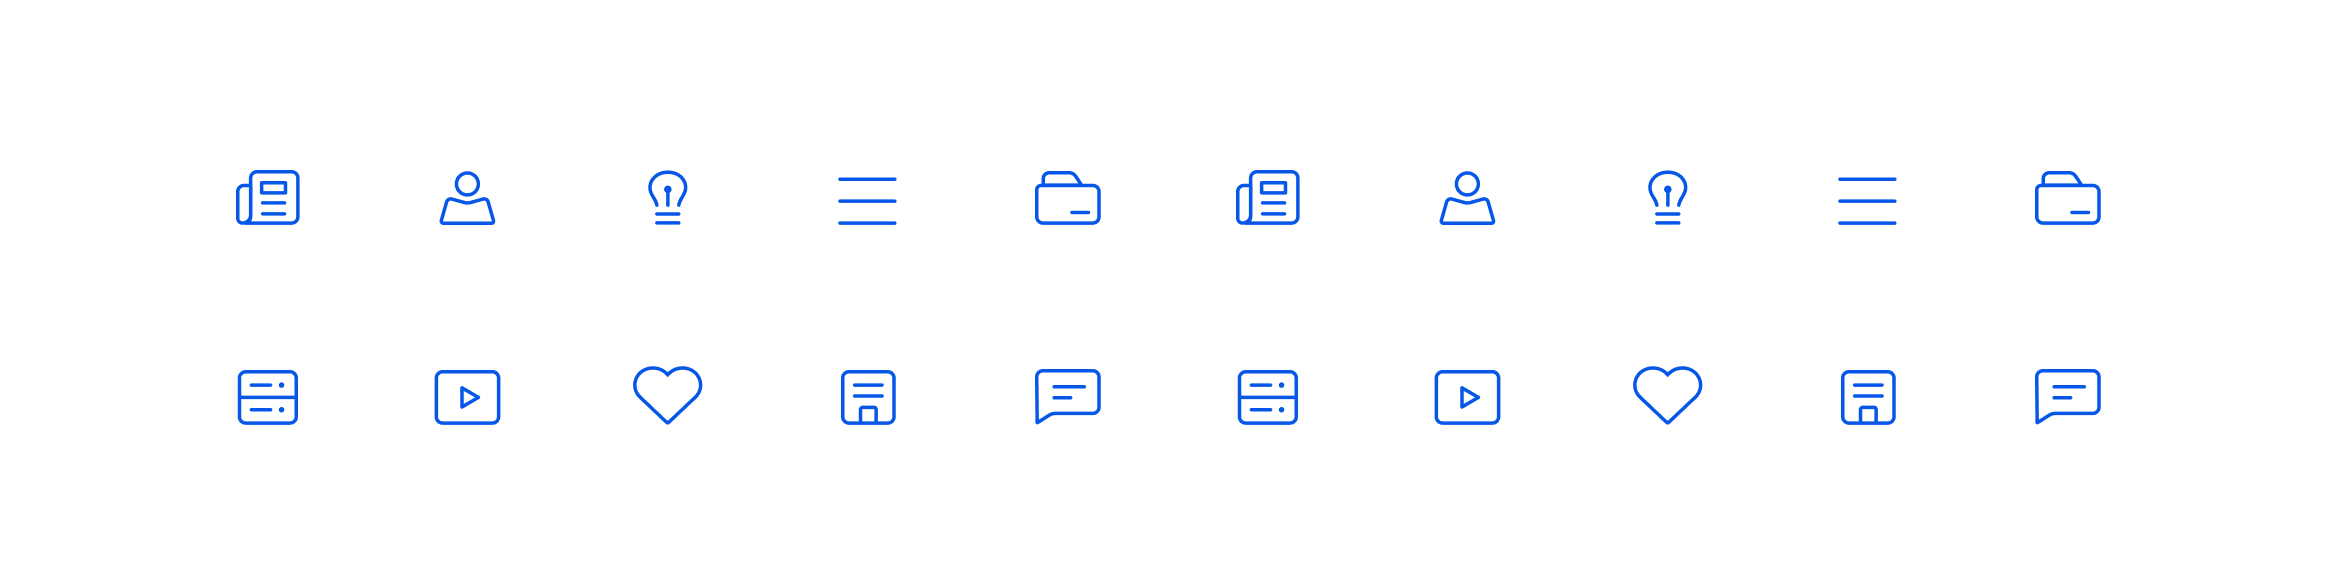 Icons to create a coherent identity